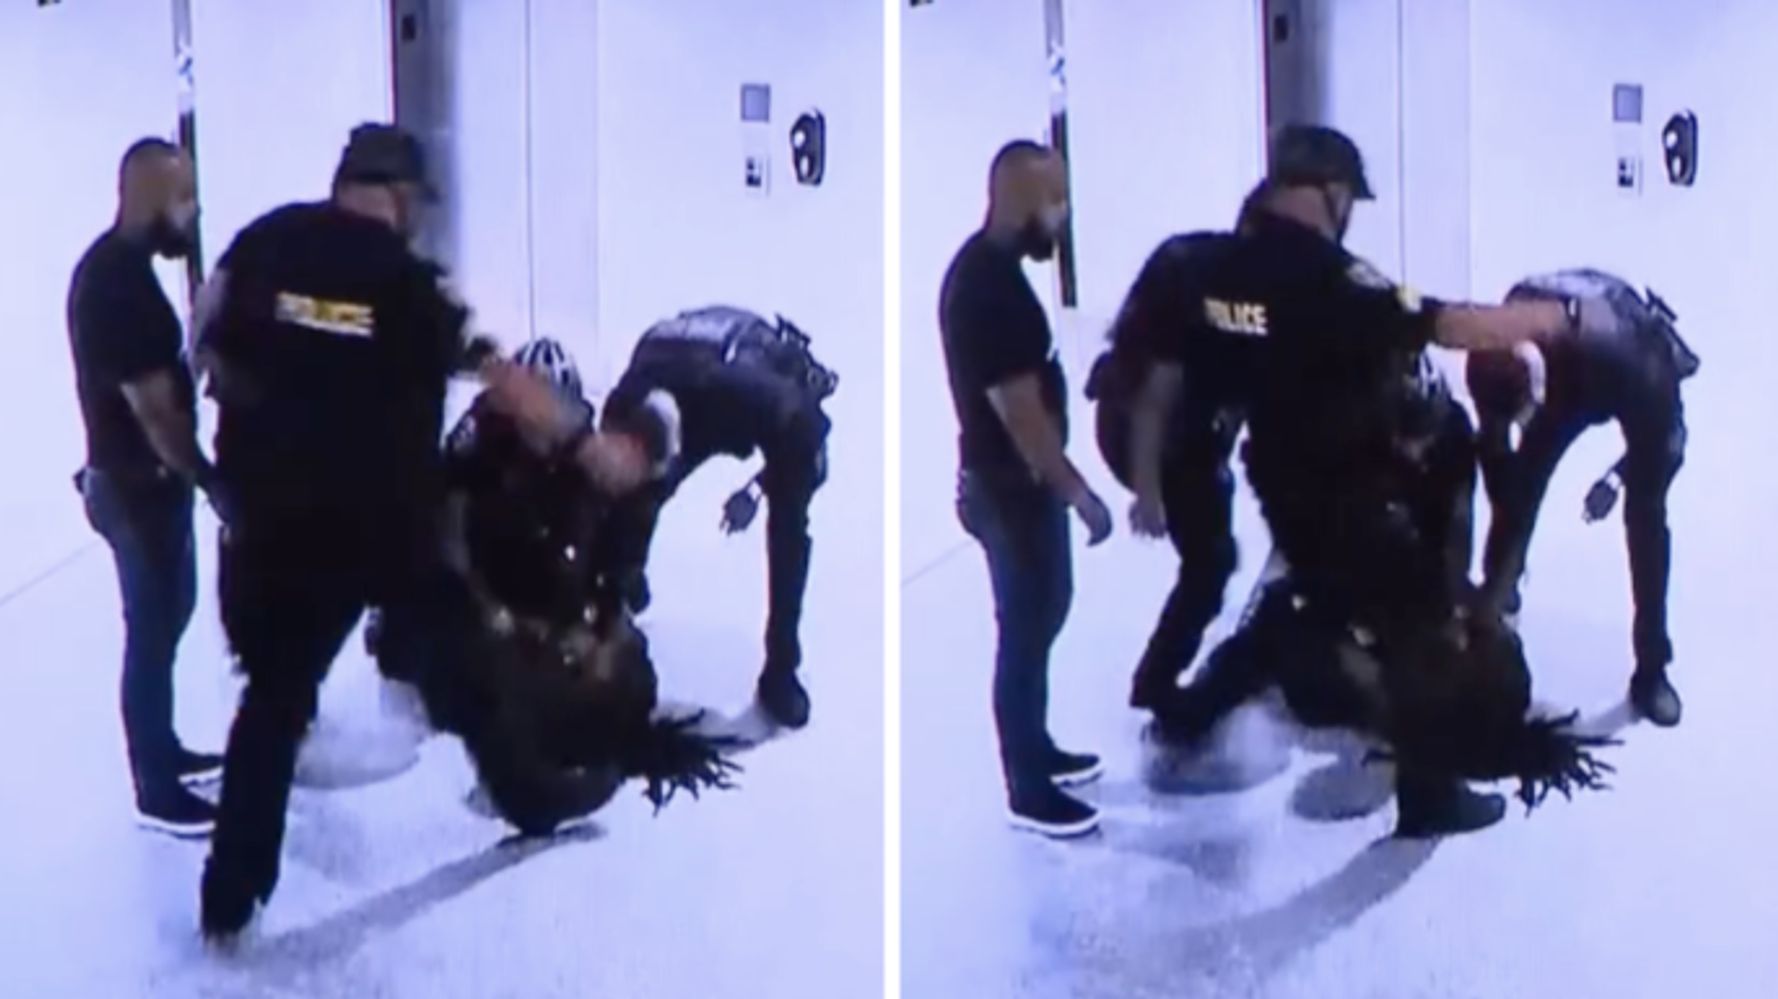 5 Miami Beach Officers Charged After Violent Arrests Of Black Men In Hotel